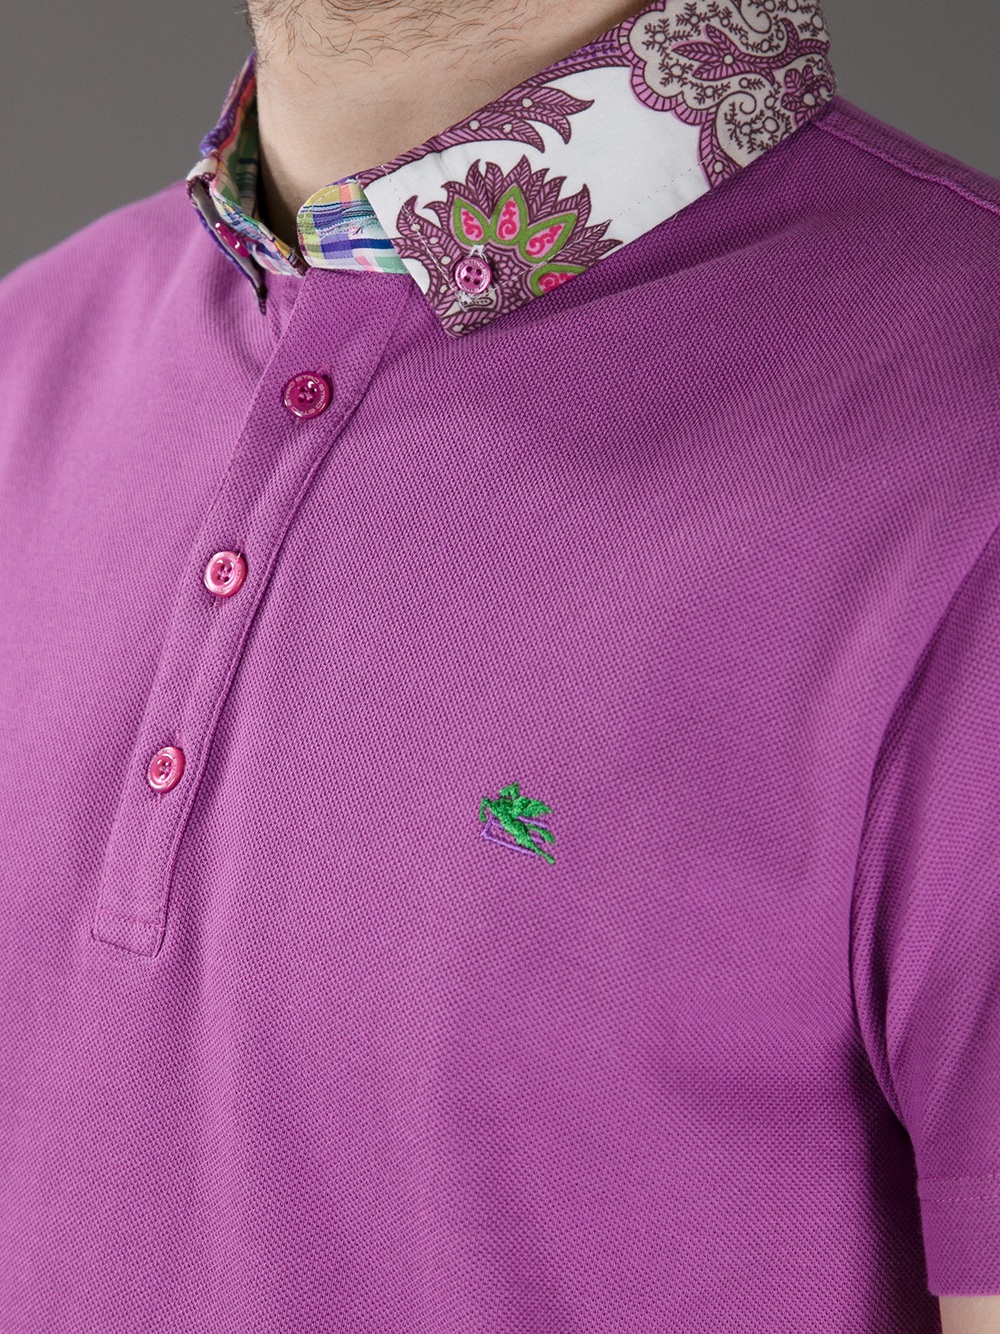 Etro Patterned Collar Polo Shirt in Purple for Men - Lyst